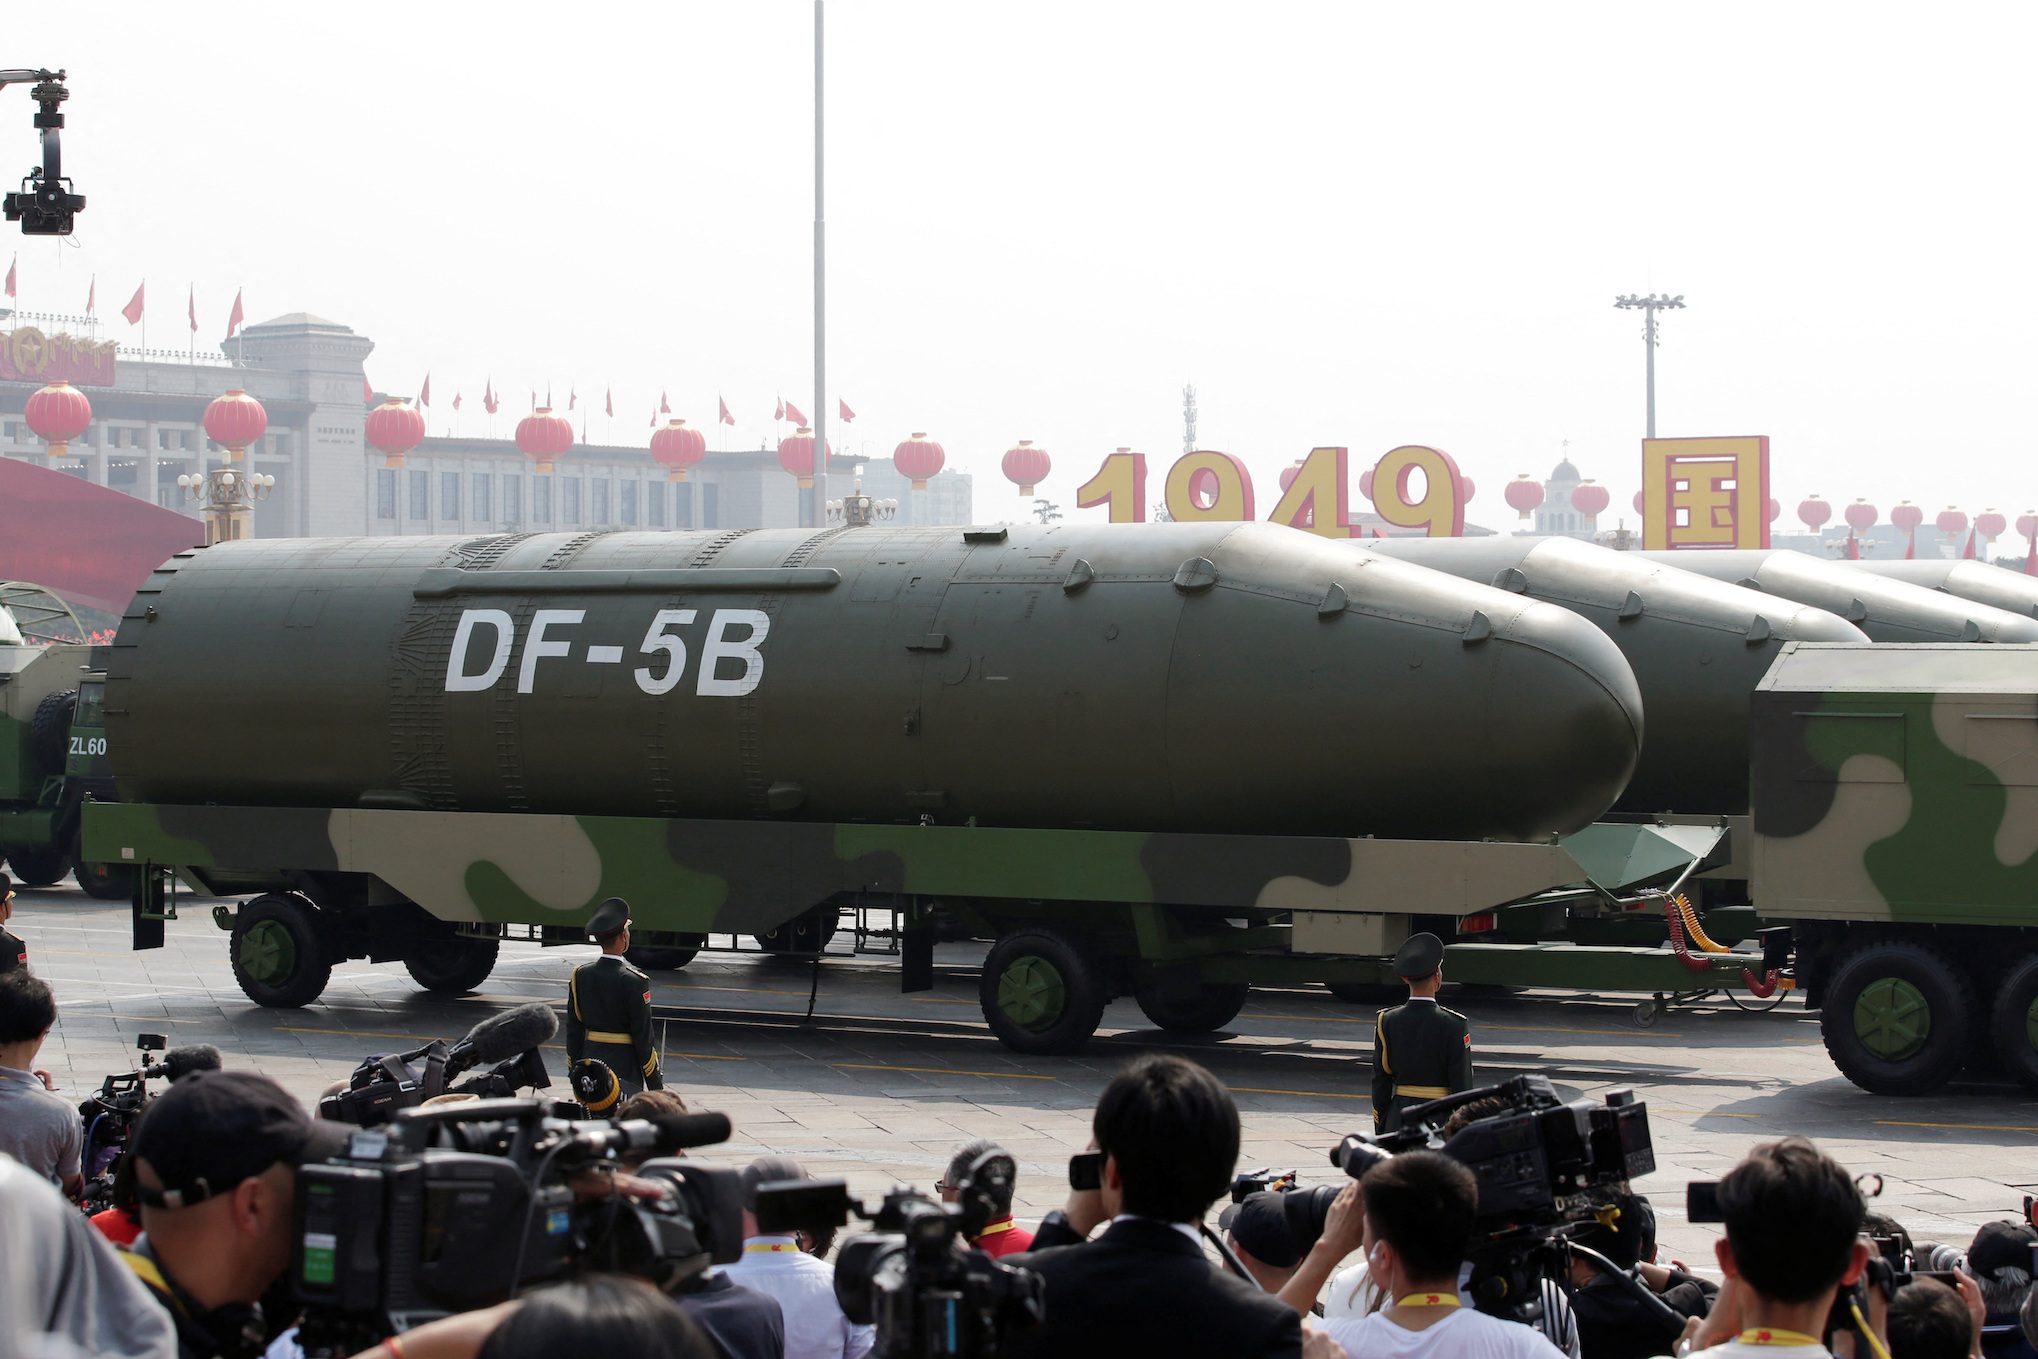 China’s nuclear arsenal at more than 500 warheads –Pentagon report